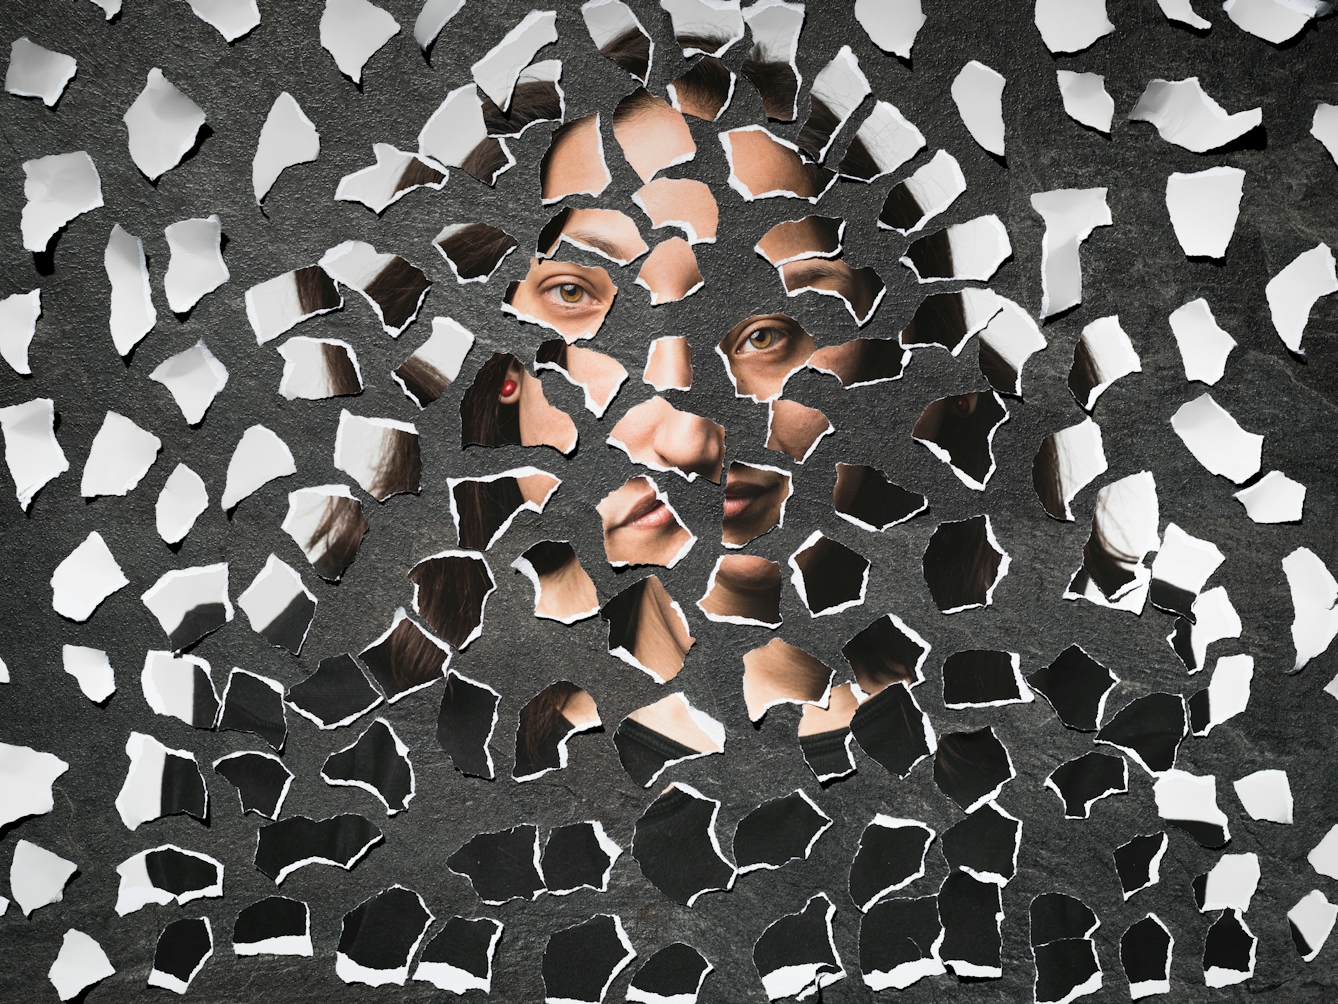 Photograph of a collages of torn up pieces of a photographic print scattered on a grey slate background. There are fragments of eyes, lips, hair and dark and light tones.